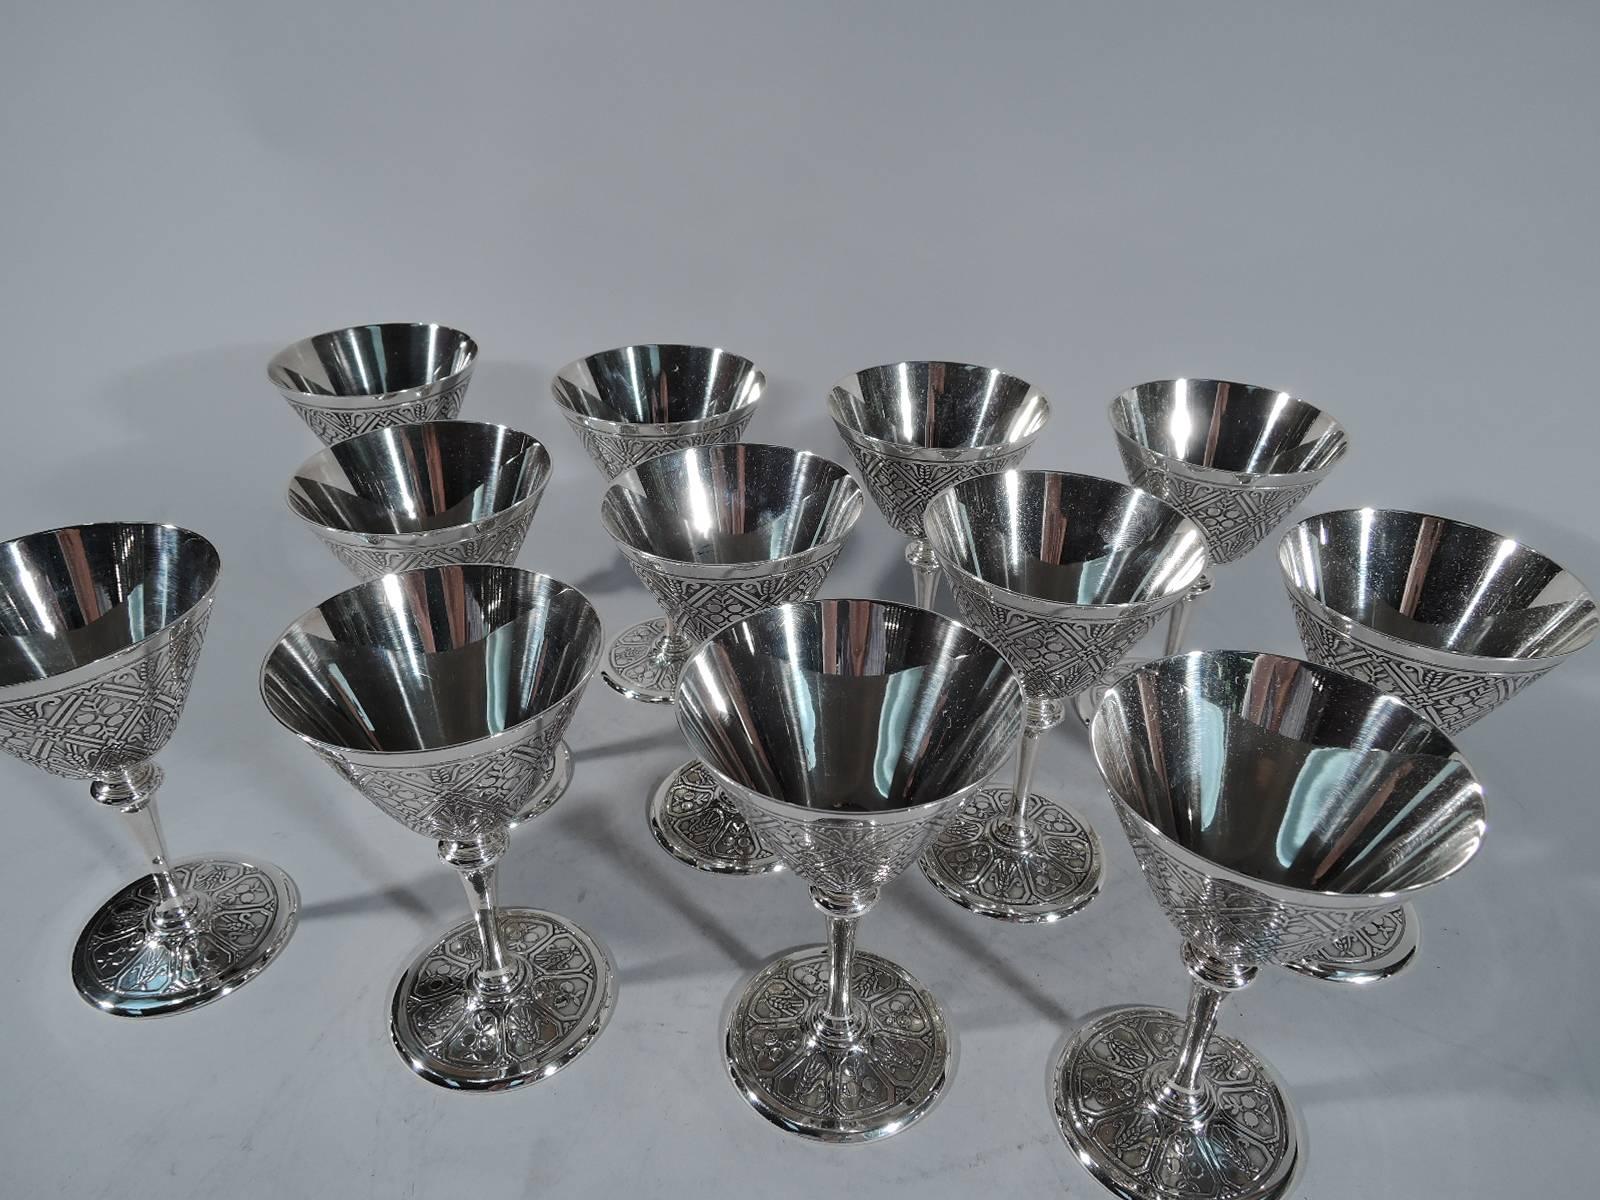 Set of 12 fabulous Art Deco sterling silver cocktail cups. Made by Tiffany & Co. in New York, circa 1922. Each: Conical bowl, tapering stem and flat foot. Bowl exterior and foot have acid-etched lattice inset with pertinent grain motif. Hallmark